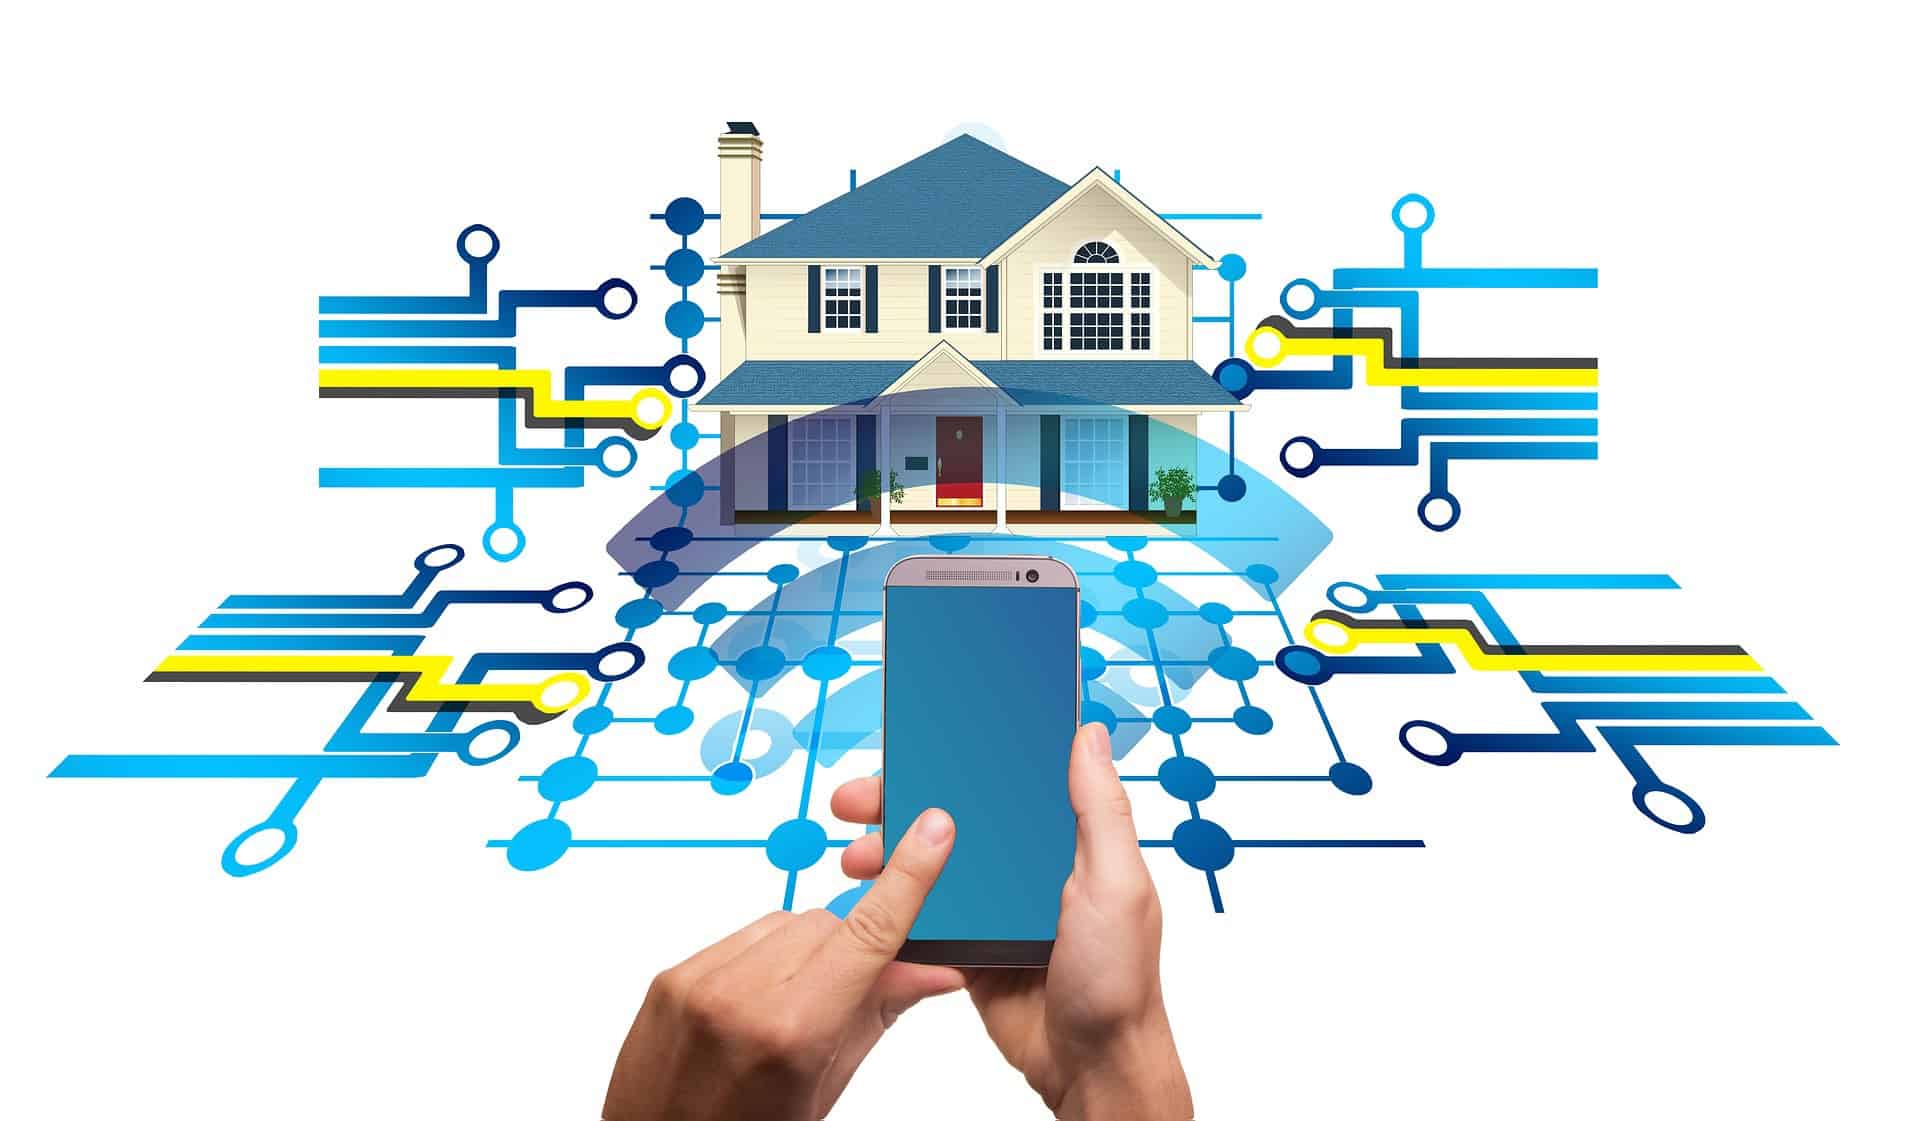 Smeltend Tegenstander communicatie Cyber Security Tips for the Smart Home - HS Today